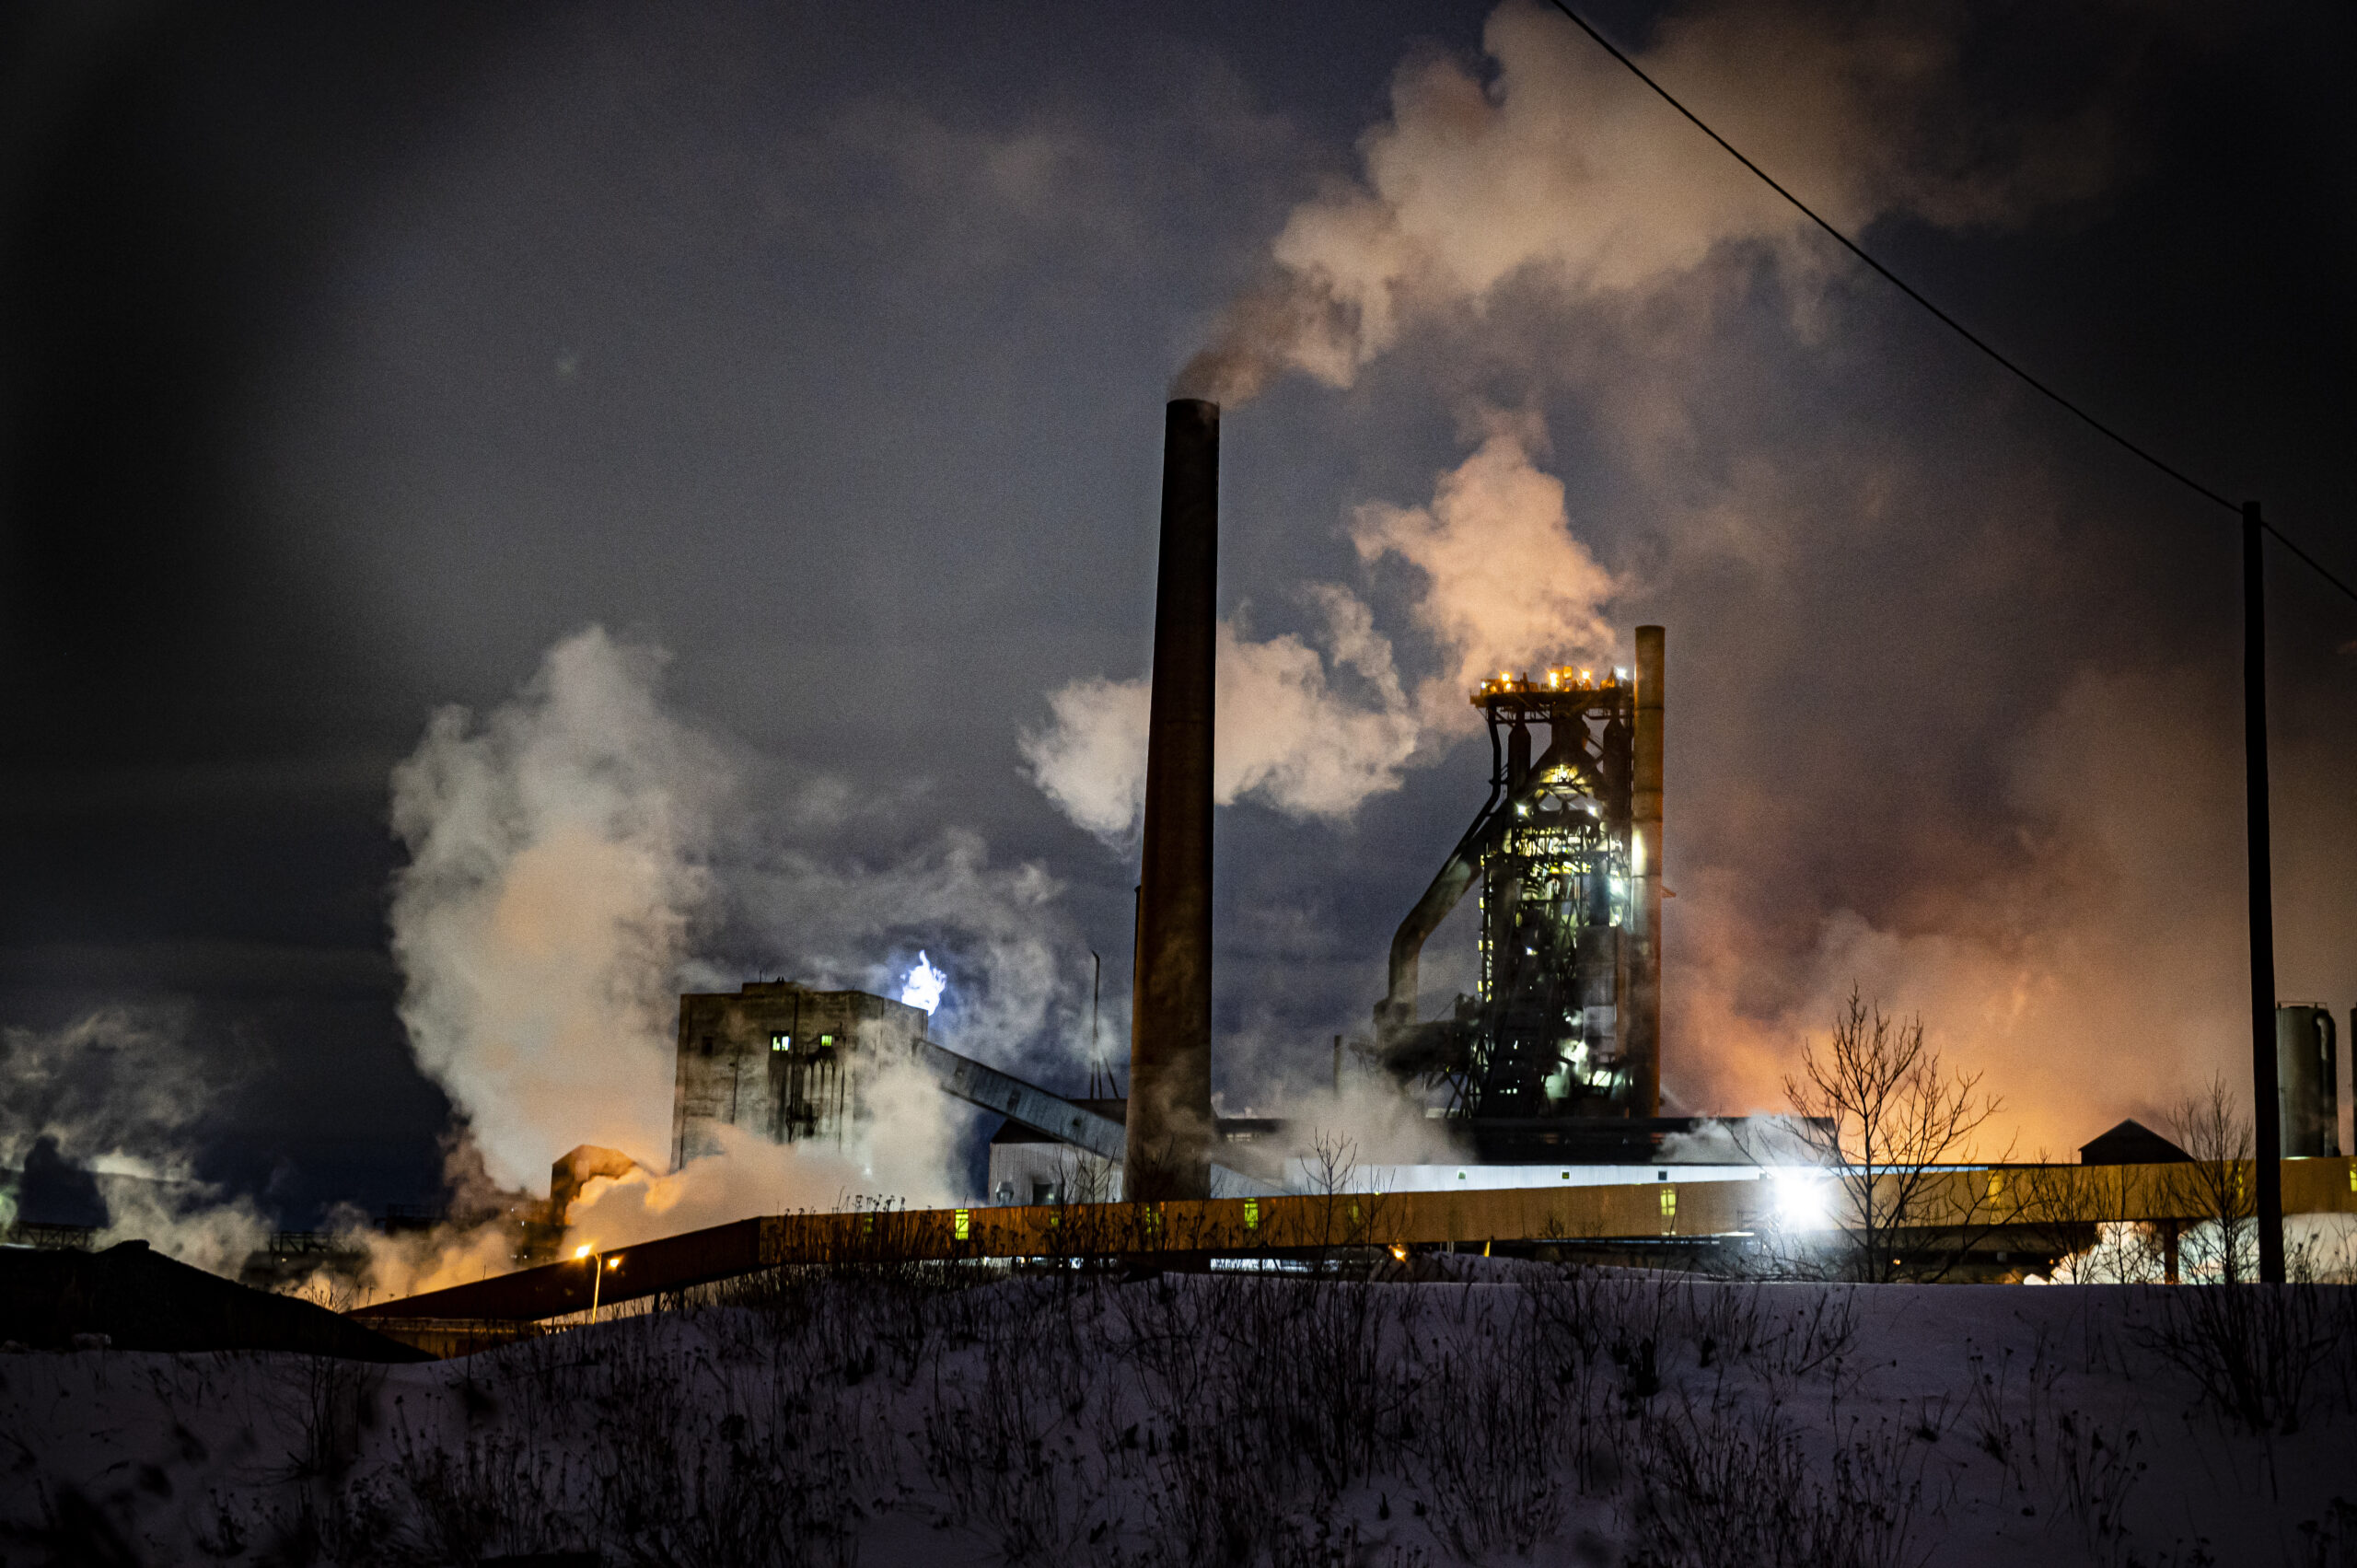 Steam rises from the industrial machinery of the Algoma Steel plant at night. 